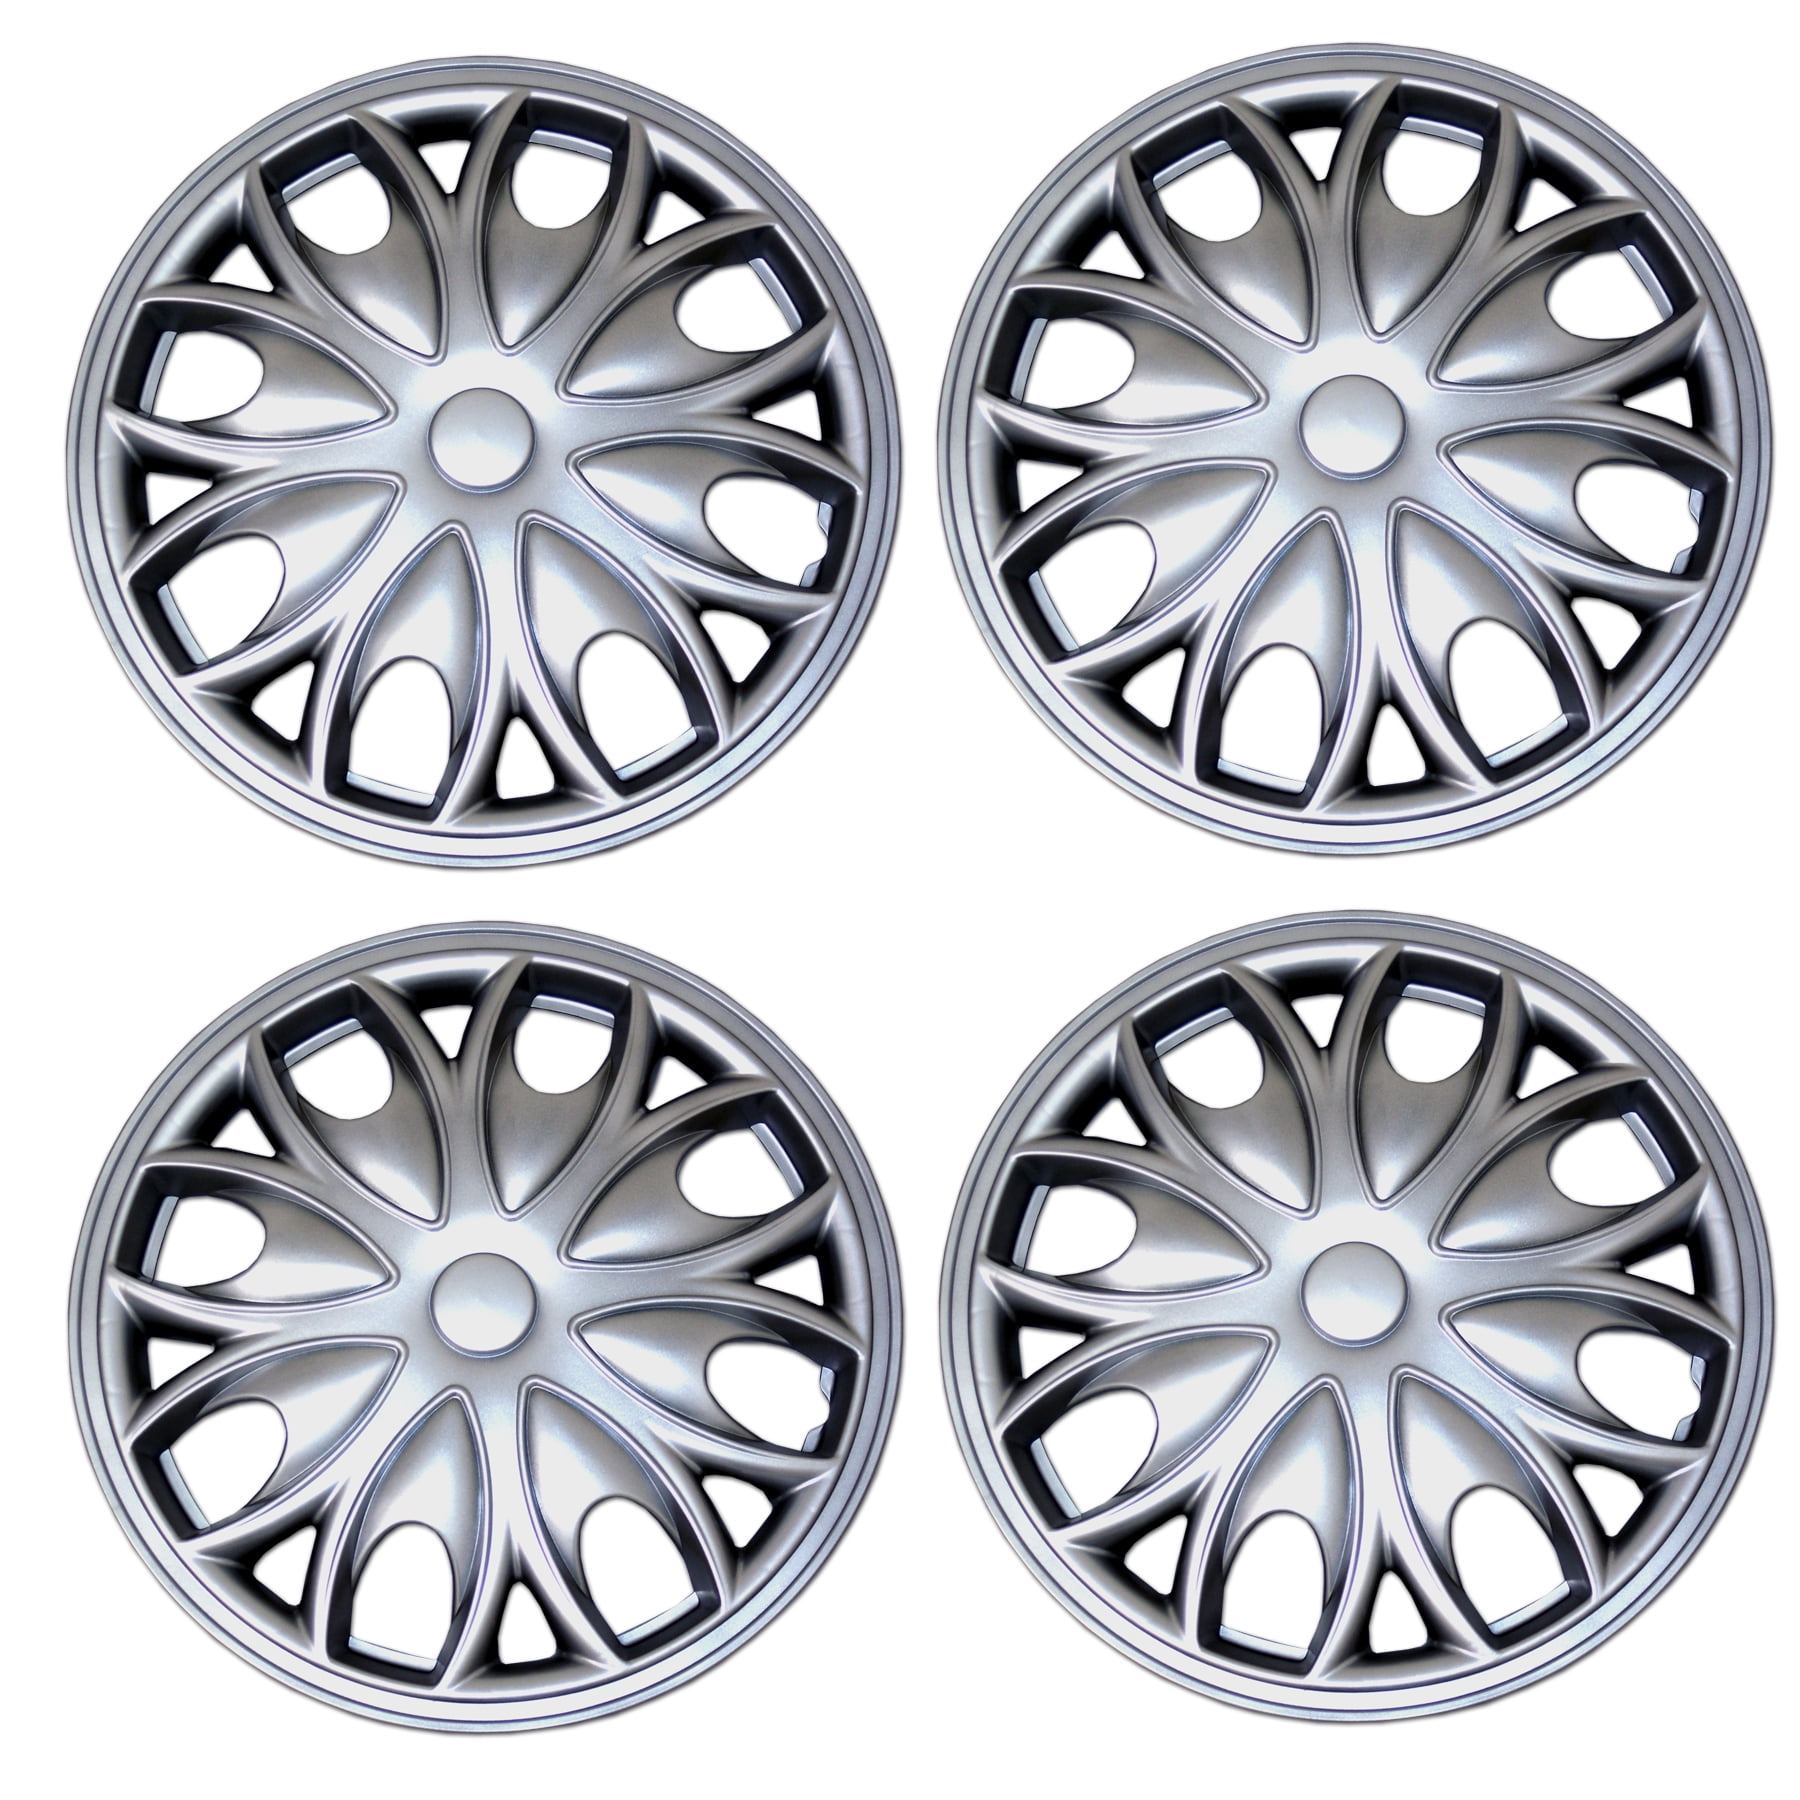 TuningPros WSC3-029S15 4pcs Set Snap-On Type 15-Inches Metallic Silver Hubcaps Wheel Cover Pop-On 